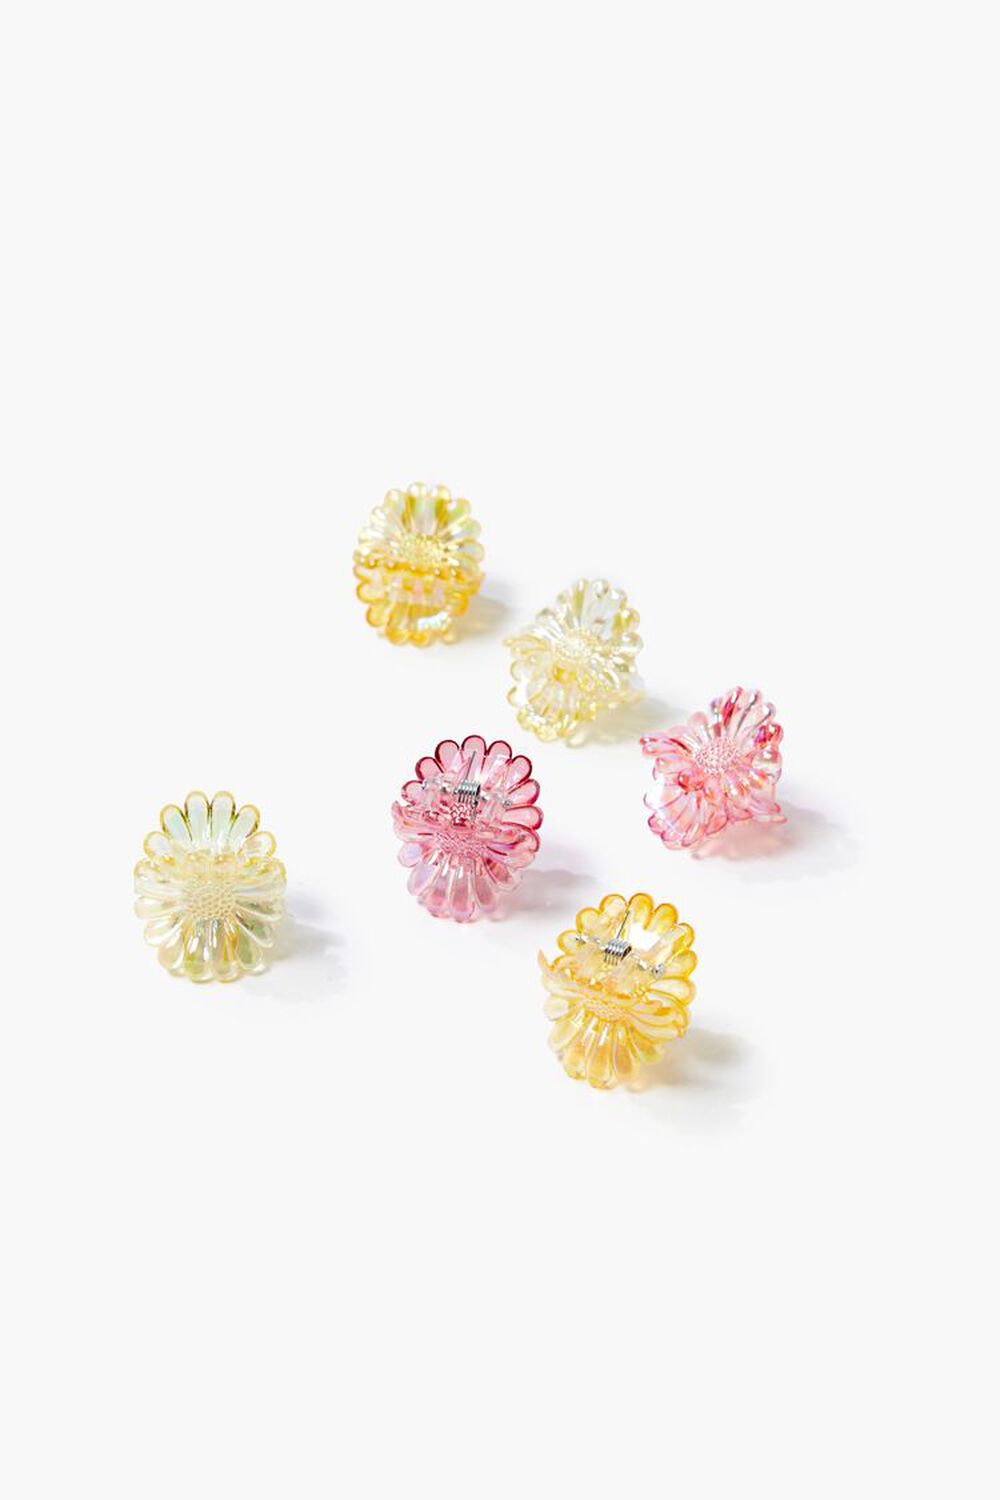 YELLOW/MULTI Floral Hair Clip Set, image 1